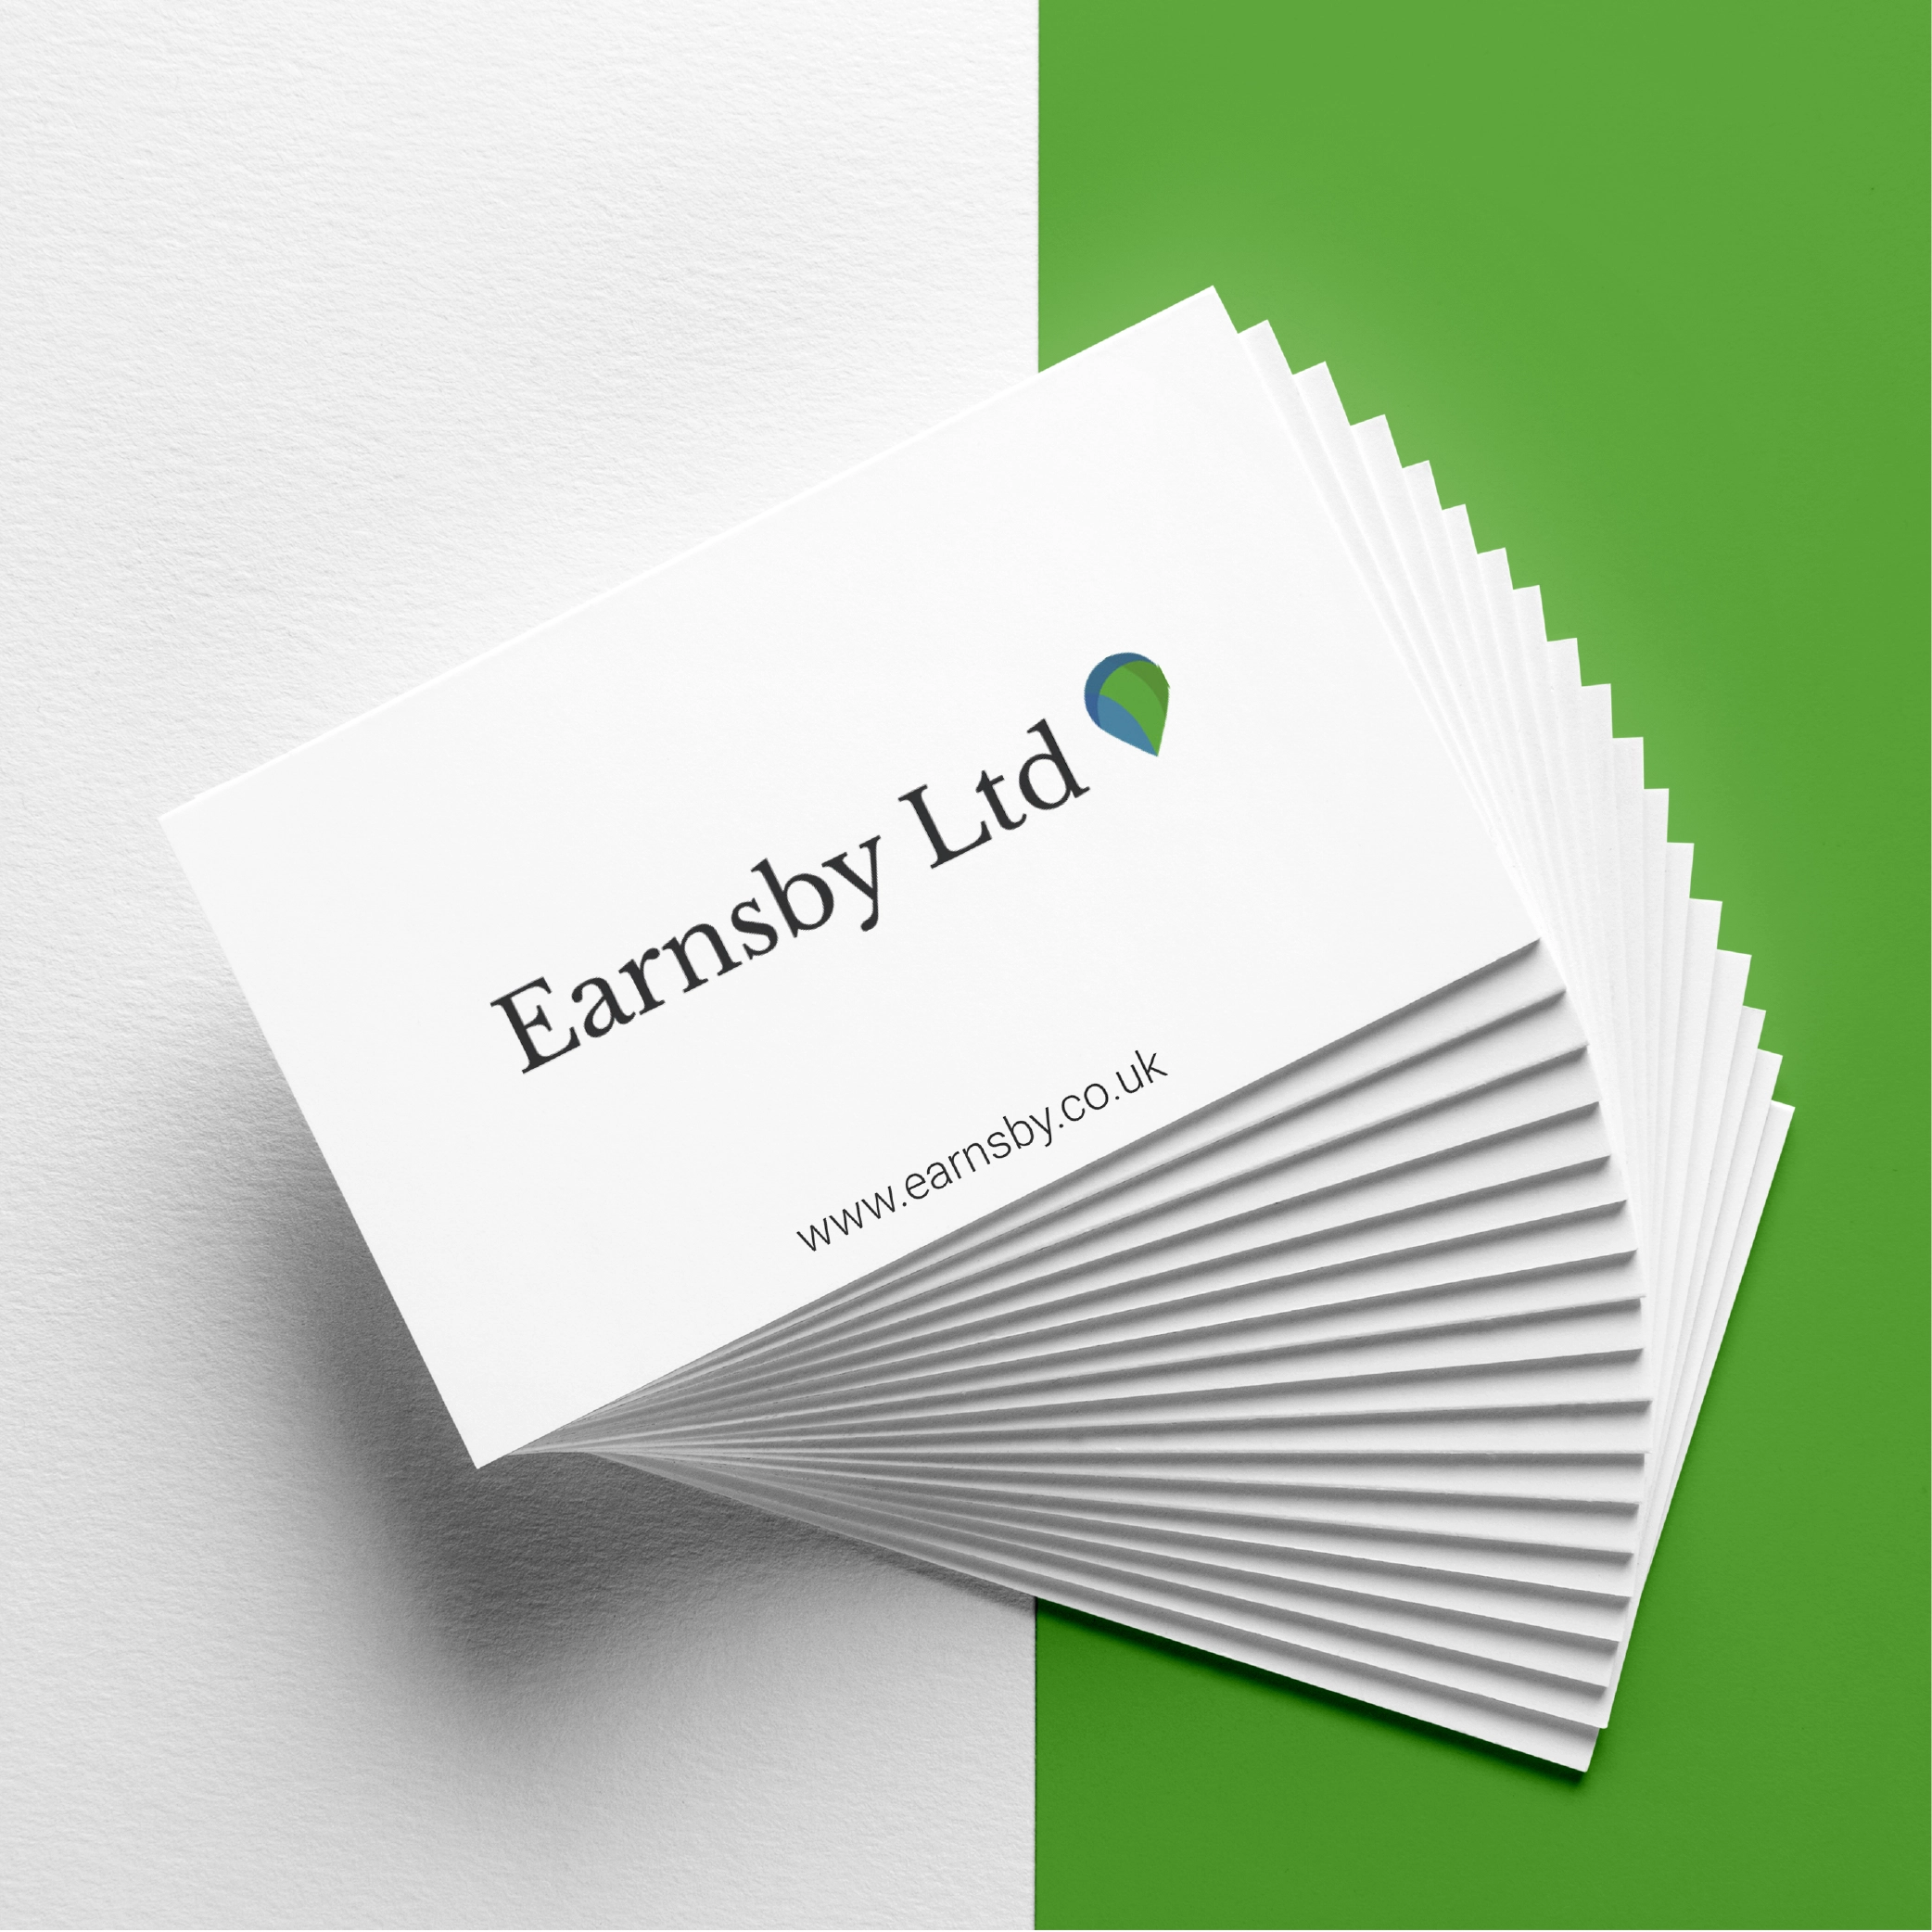 Mockup of Earnsby Ltd business cards